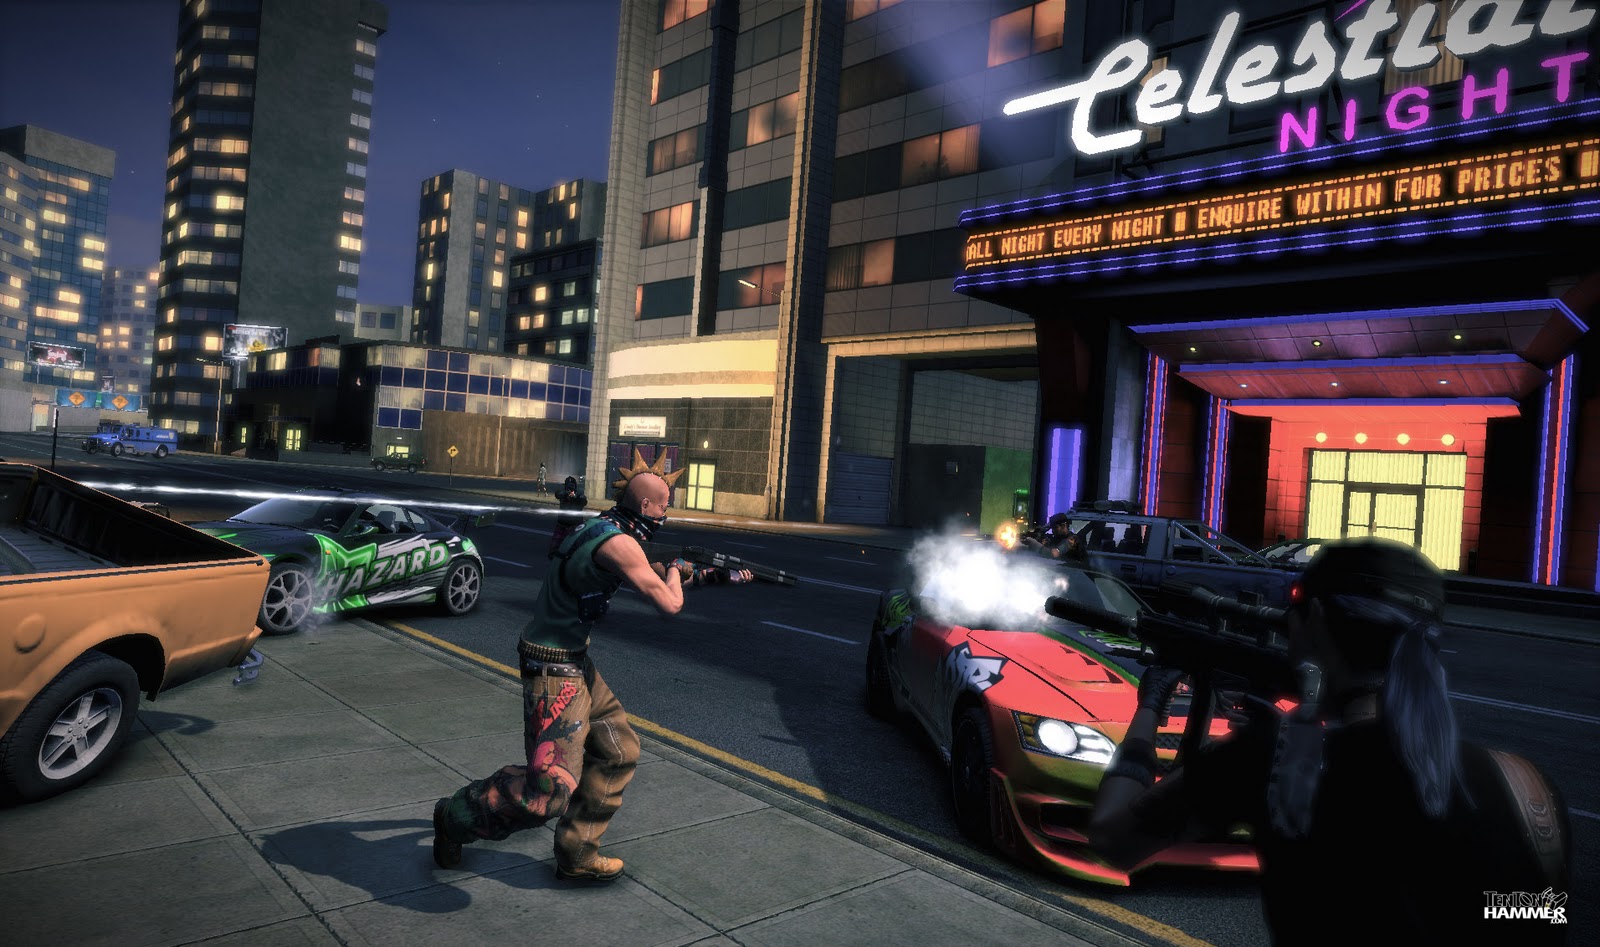 apb reloaded online game